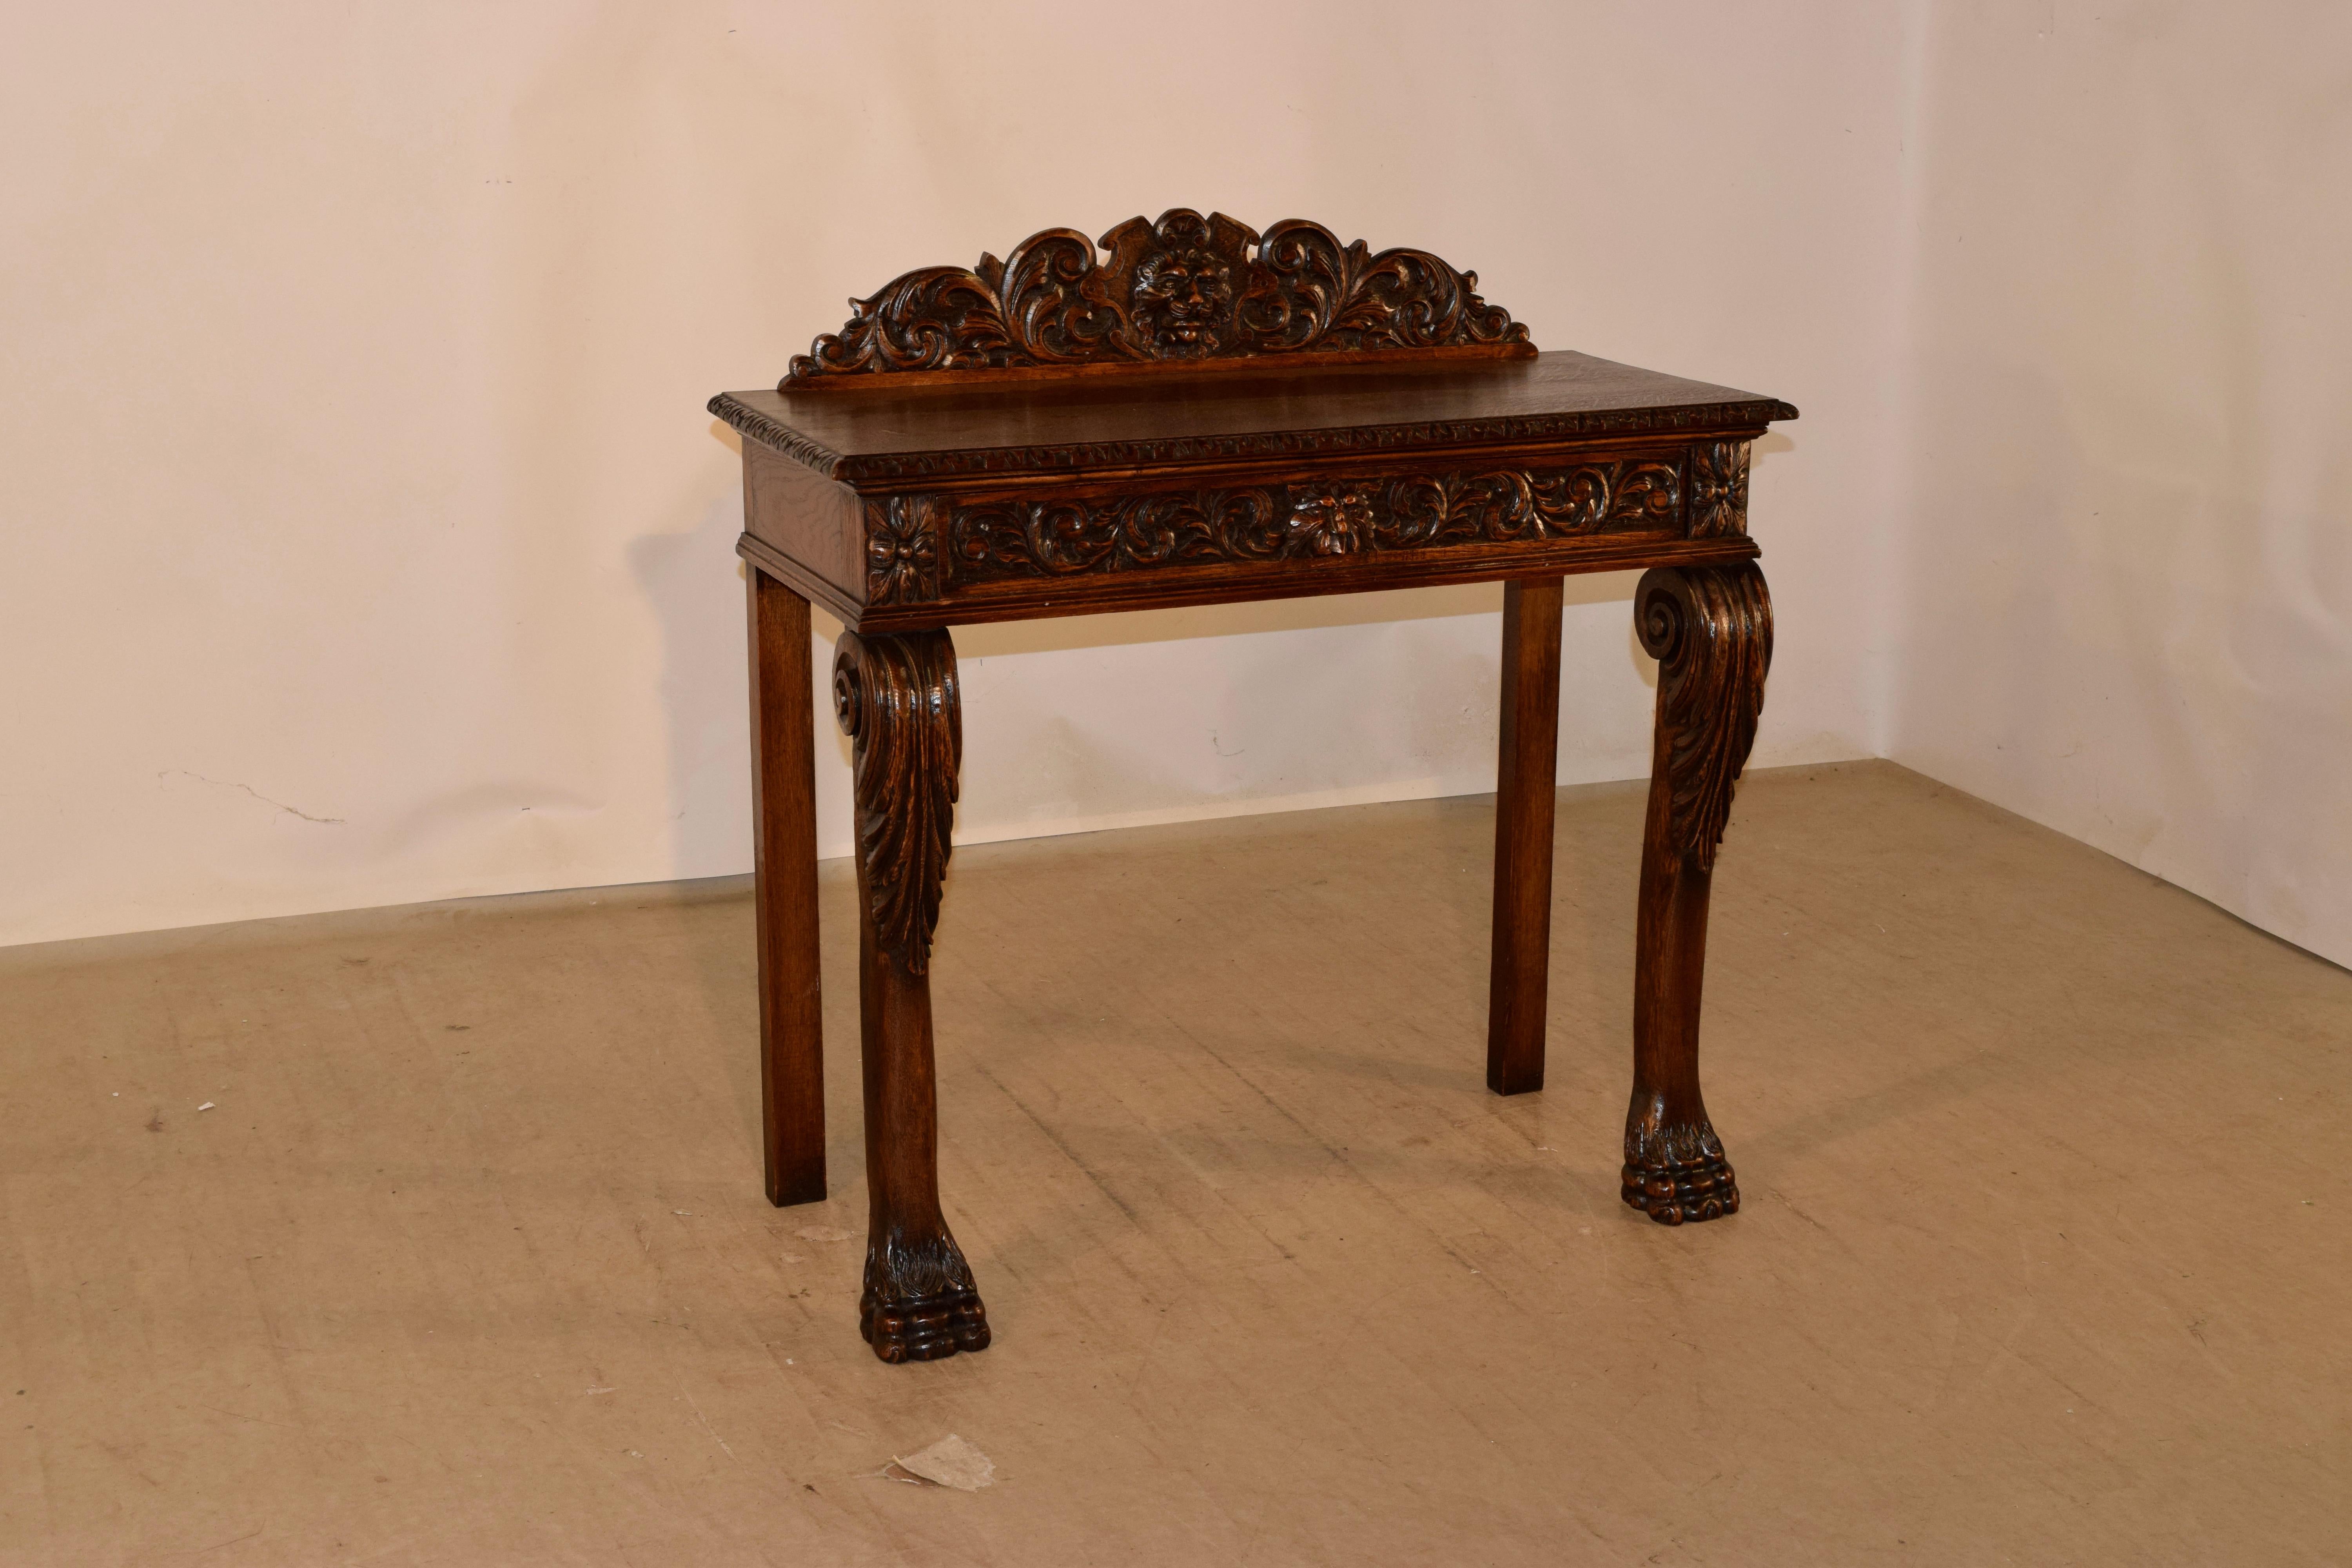 19th century oak console table from England with a stately hand carved decorated backsplash which has a central shield with a lions head surrounded by acanthus leaves, over a top with a beveled and carved decorated edge. This follows down to simple